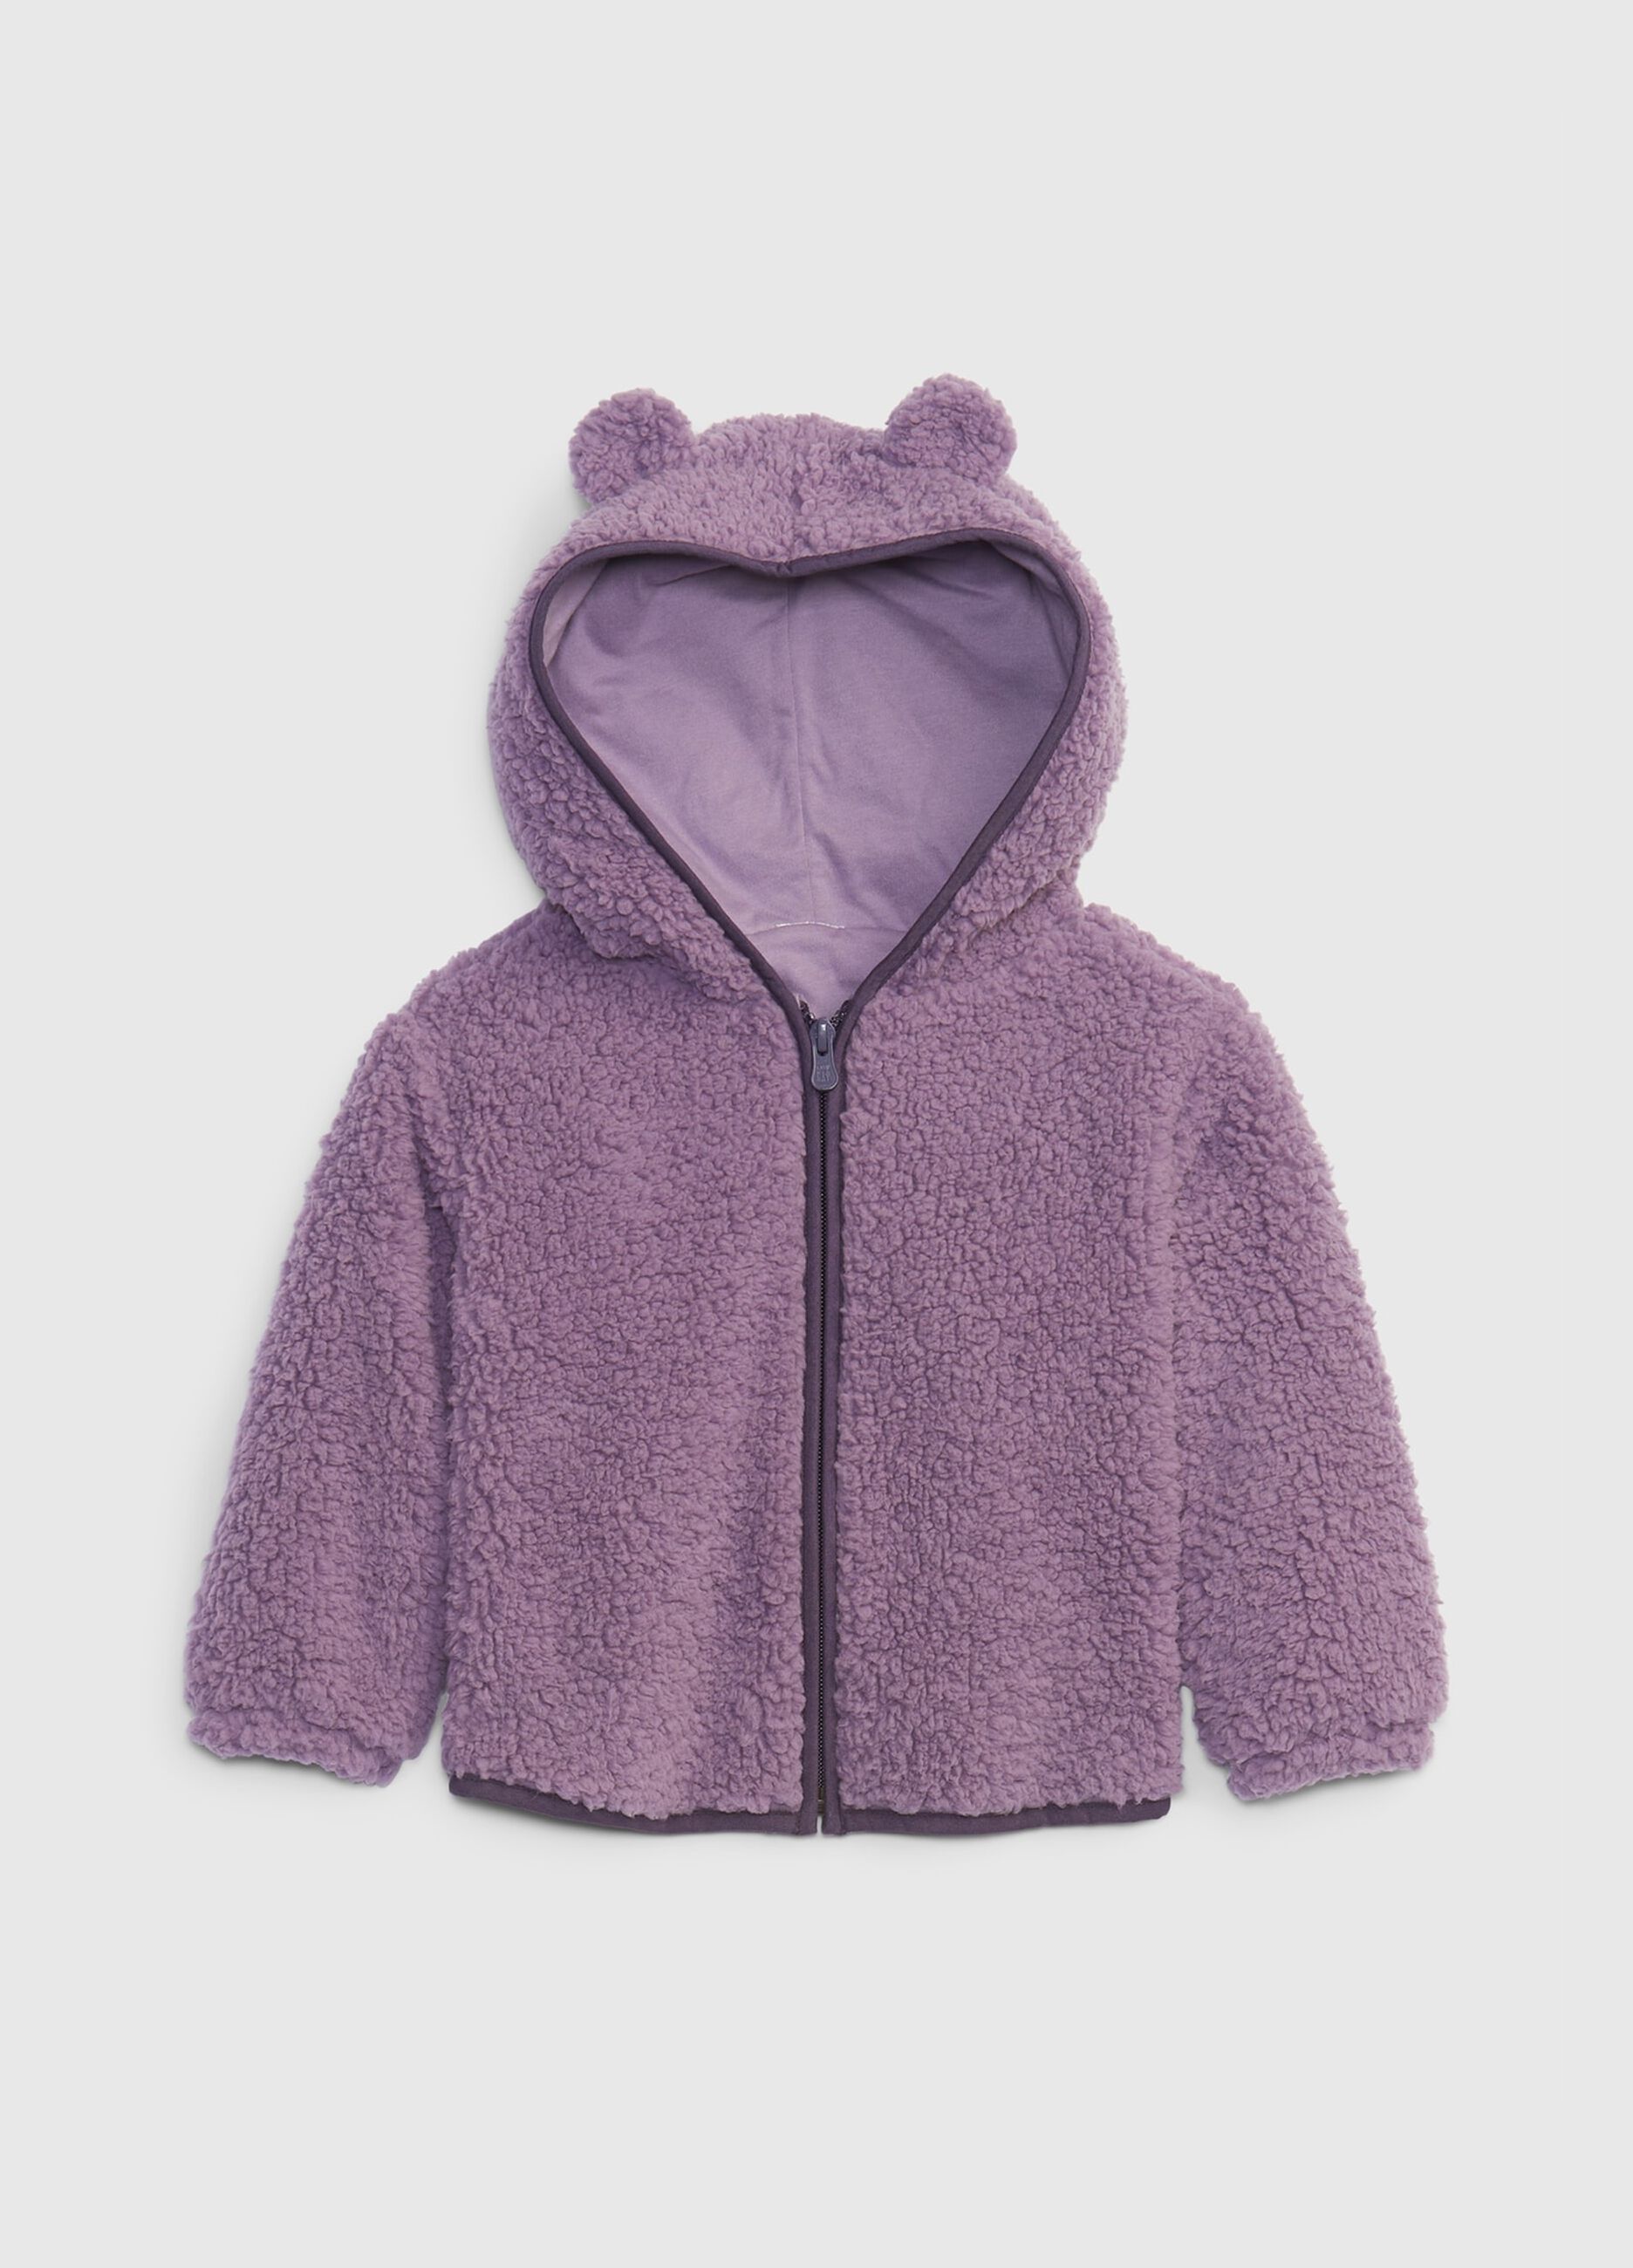 Full-zip in sherpa with hood and ears